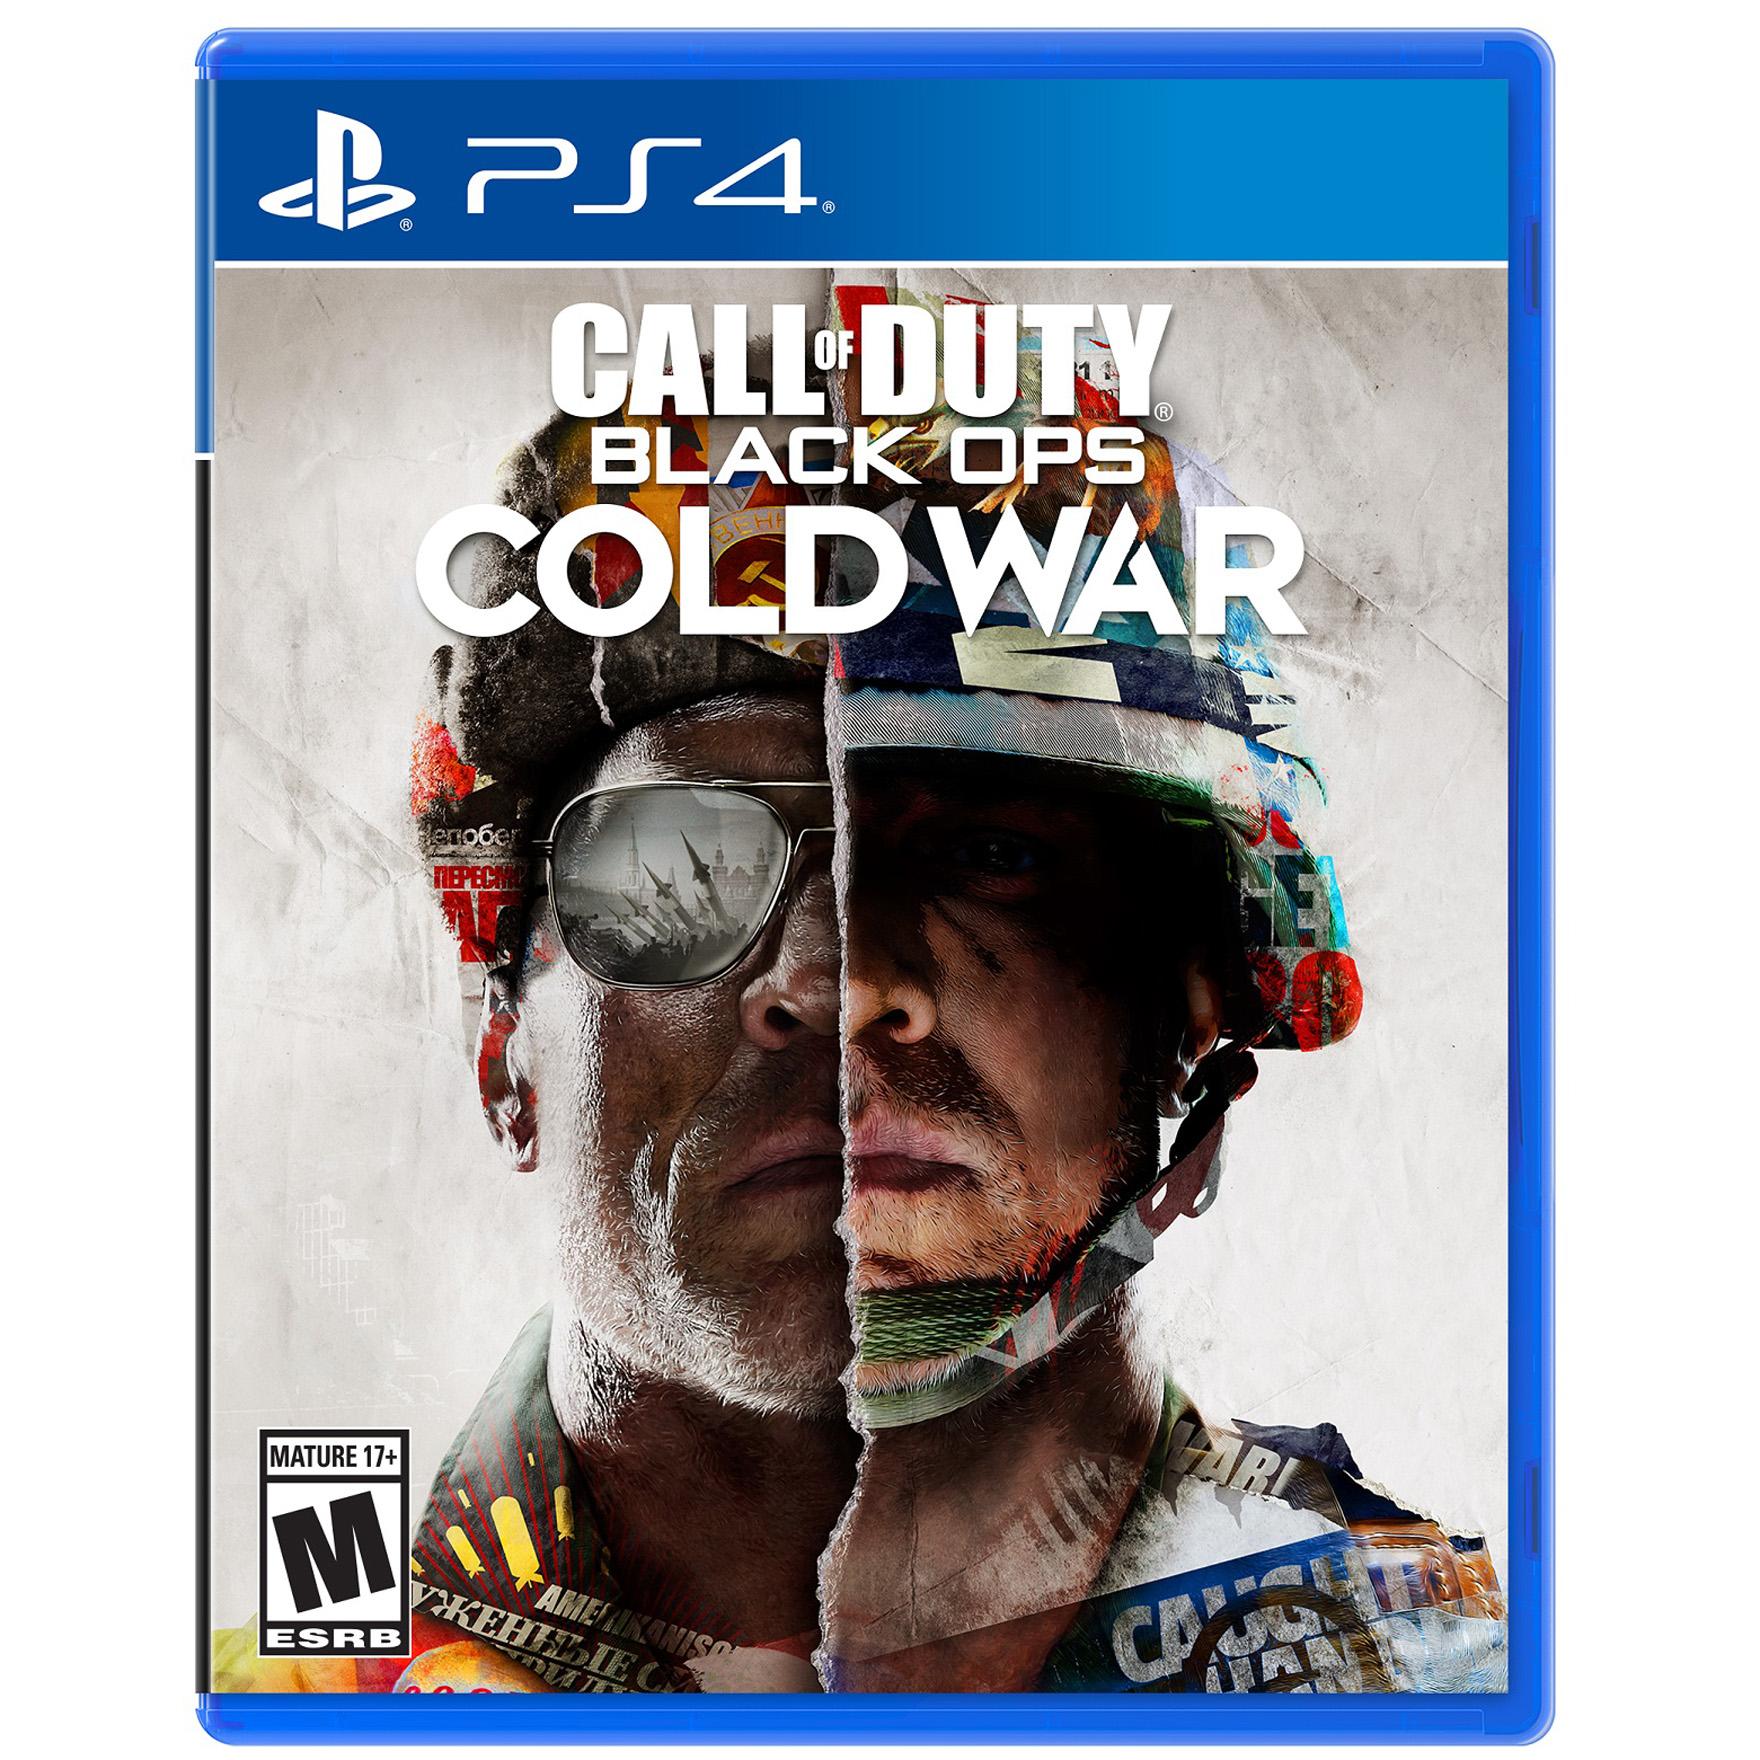 Call of Duty Black Ops Cold War for $49.94 Shipped